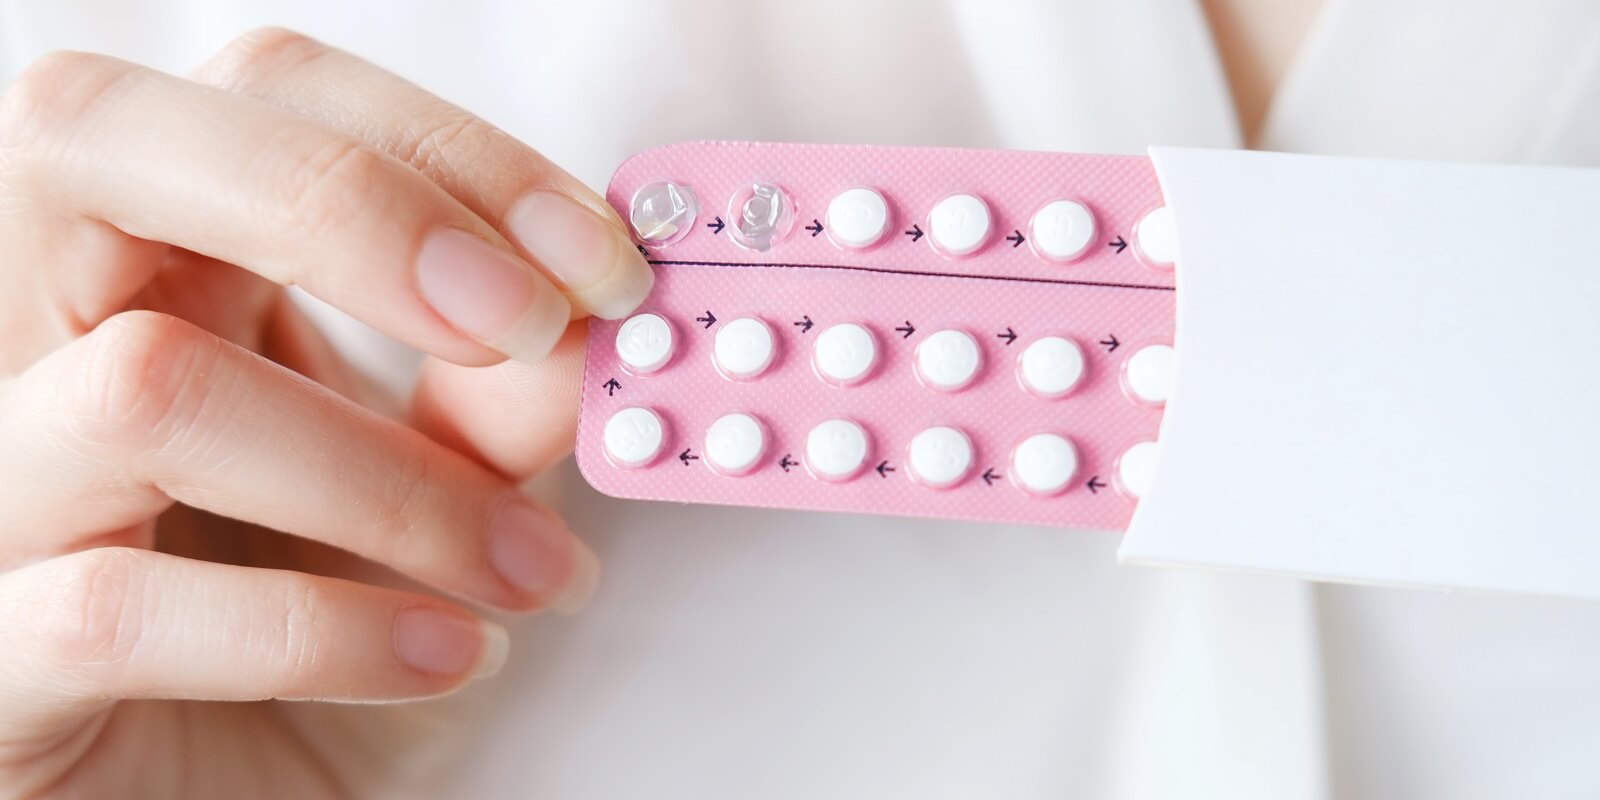 unrecognized woman in white blouse holding hormonal oral contraceptives in a pink blister